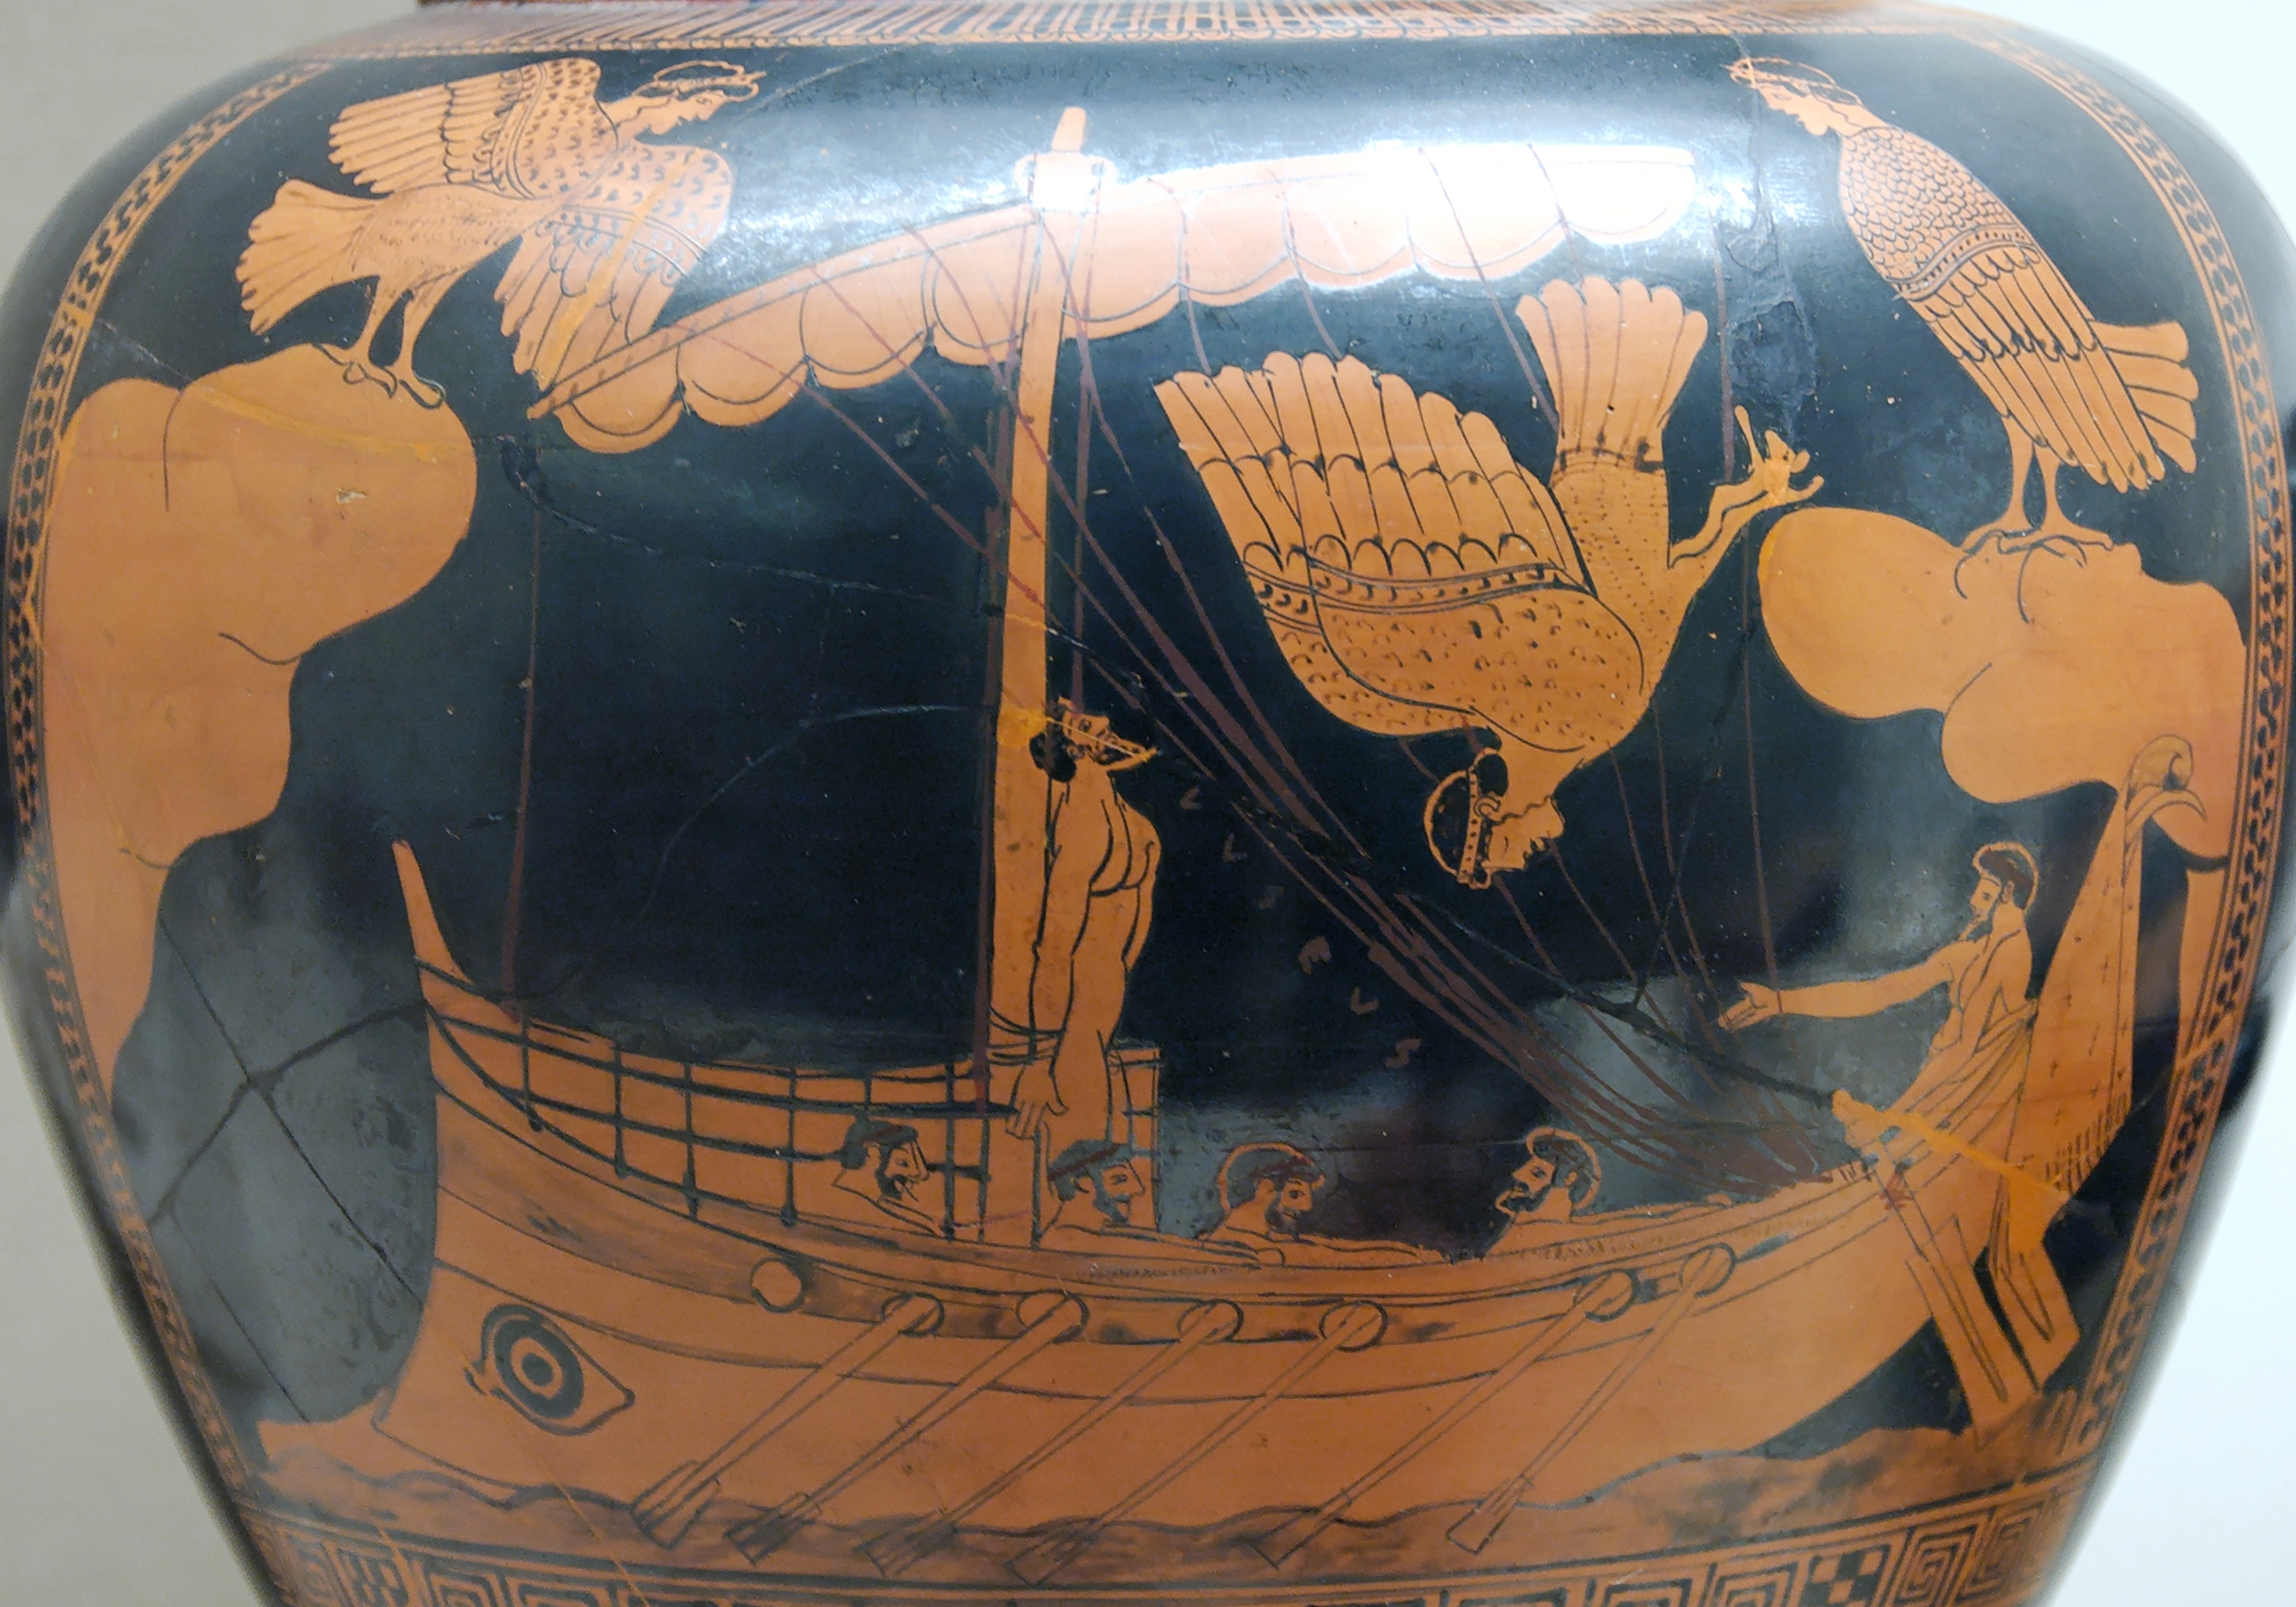 Odysseus and the Sirens; detail from an Attic red-figured stamnos, ca. 480-470 BC from Vulci. (Image: Wikimedia Commons)

We produce many types of sign.  
The story of Odysseus and the sirens crafts the word ‘siren’ into a metaphor; a culturally coded symbol.  For the seafaring nation of ancient Greece, sirens symbolise the ‘inner voices’ familiar to sailors alone on the ocean.  The story speaks of how prolonged isolation at sea can trick the mind, tempting a man to destroy himself.